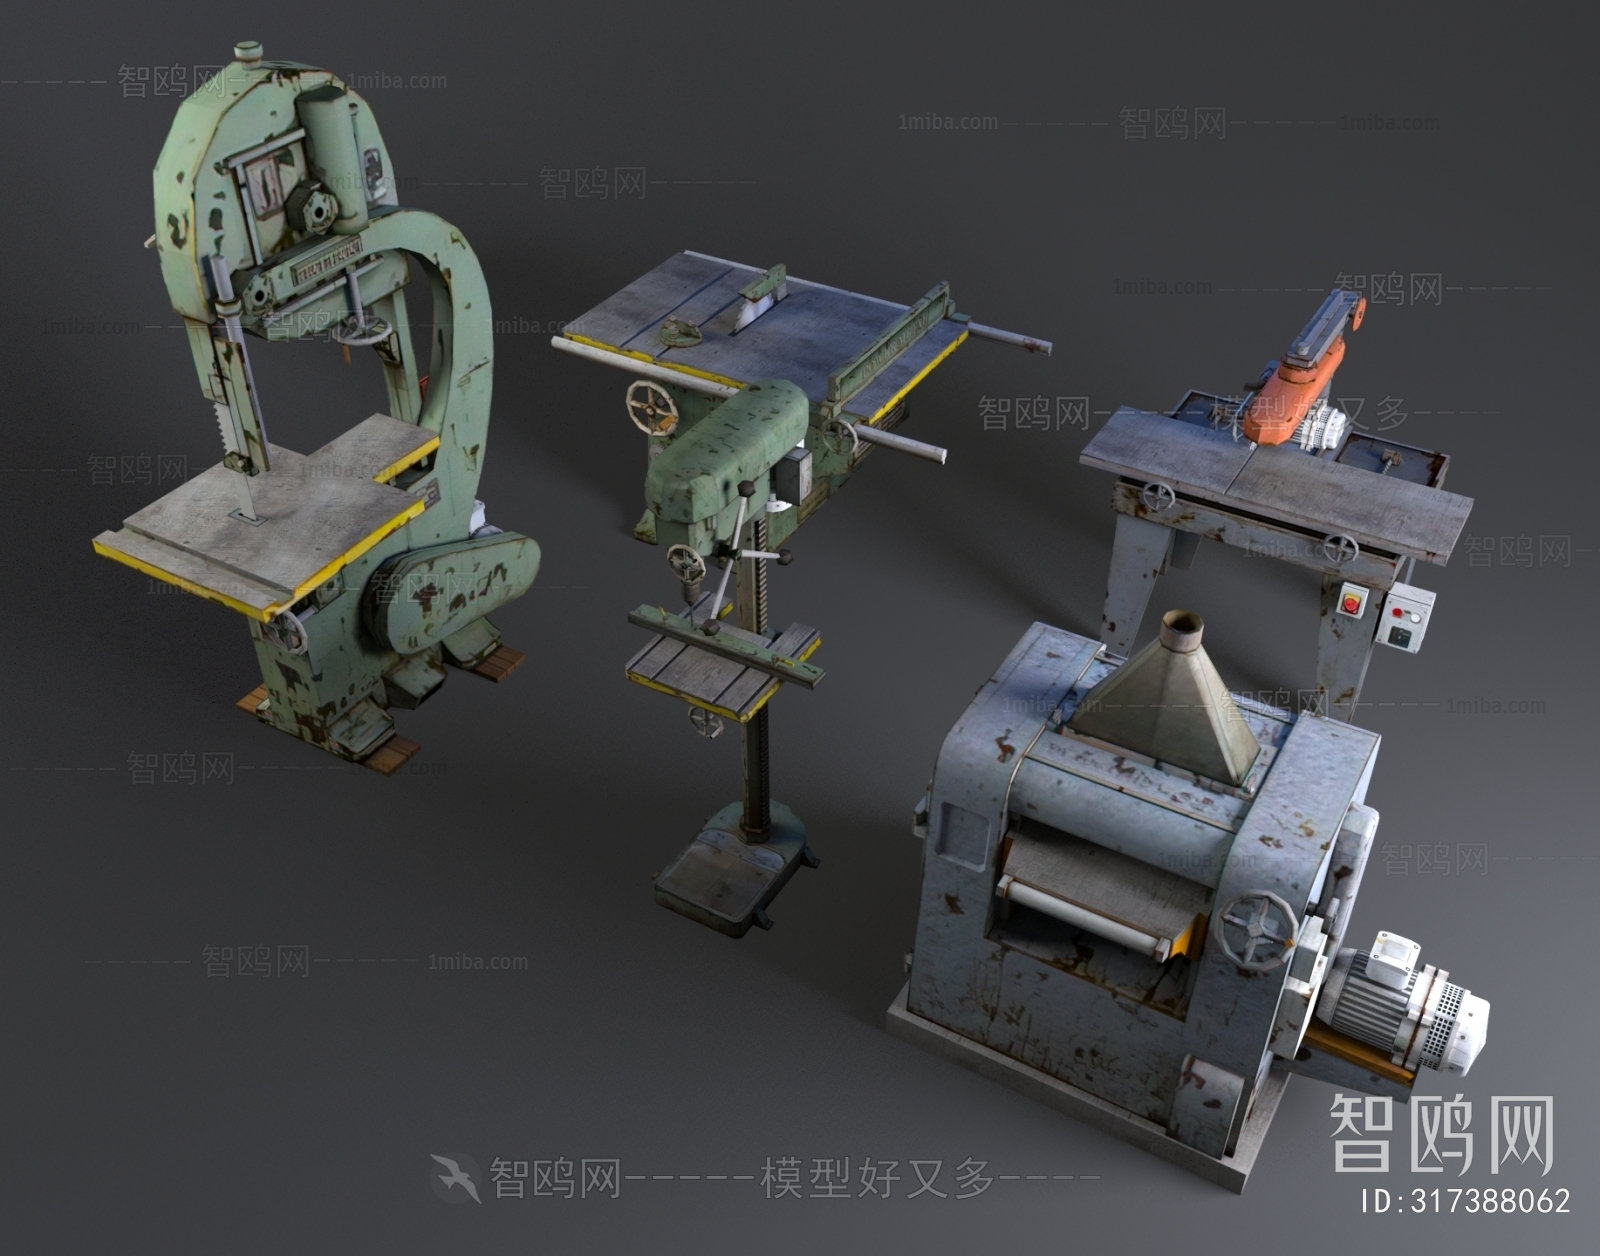 Industrial Style Industrial Equipment